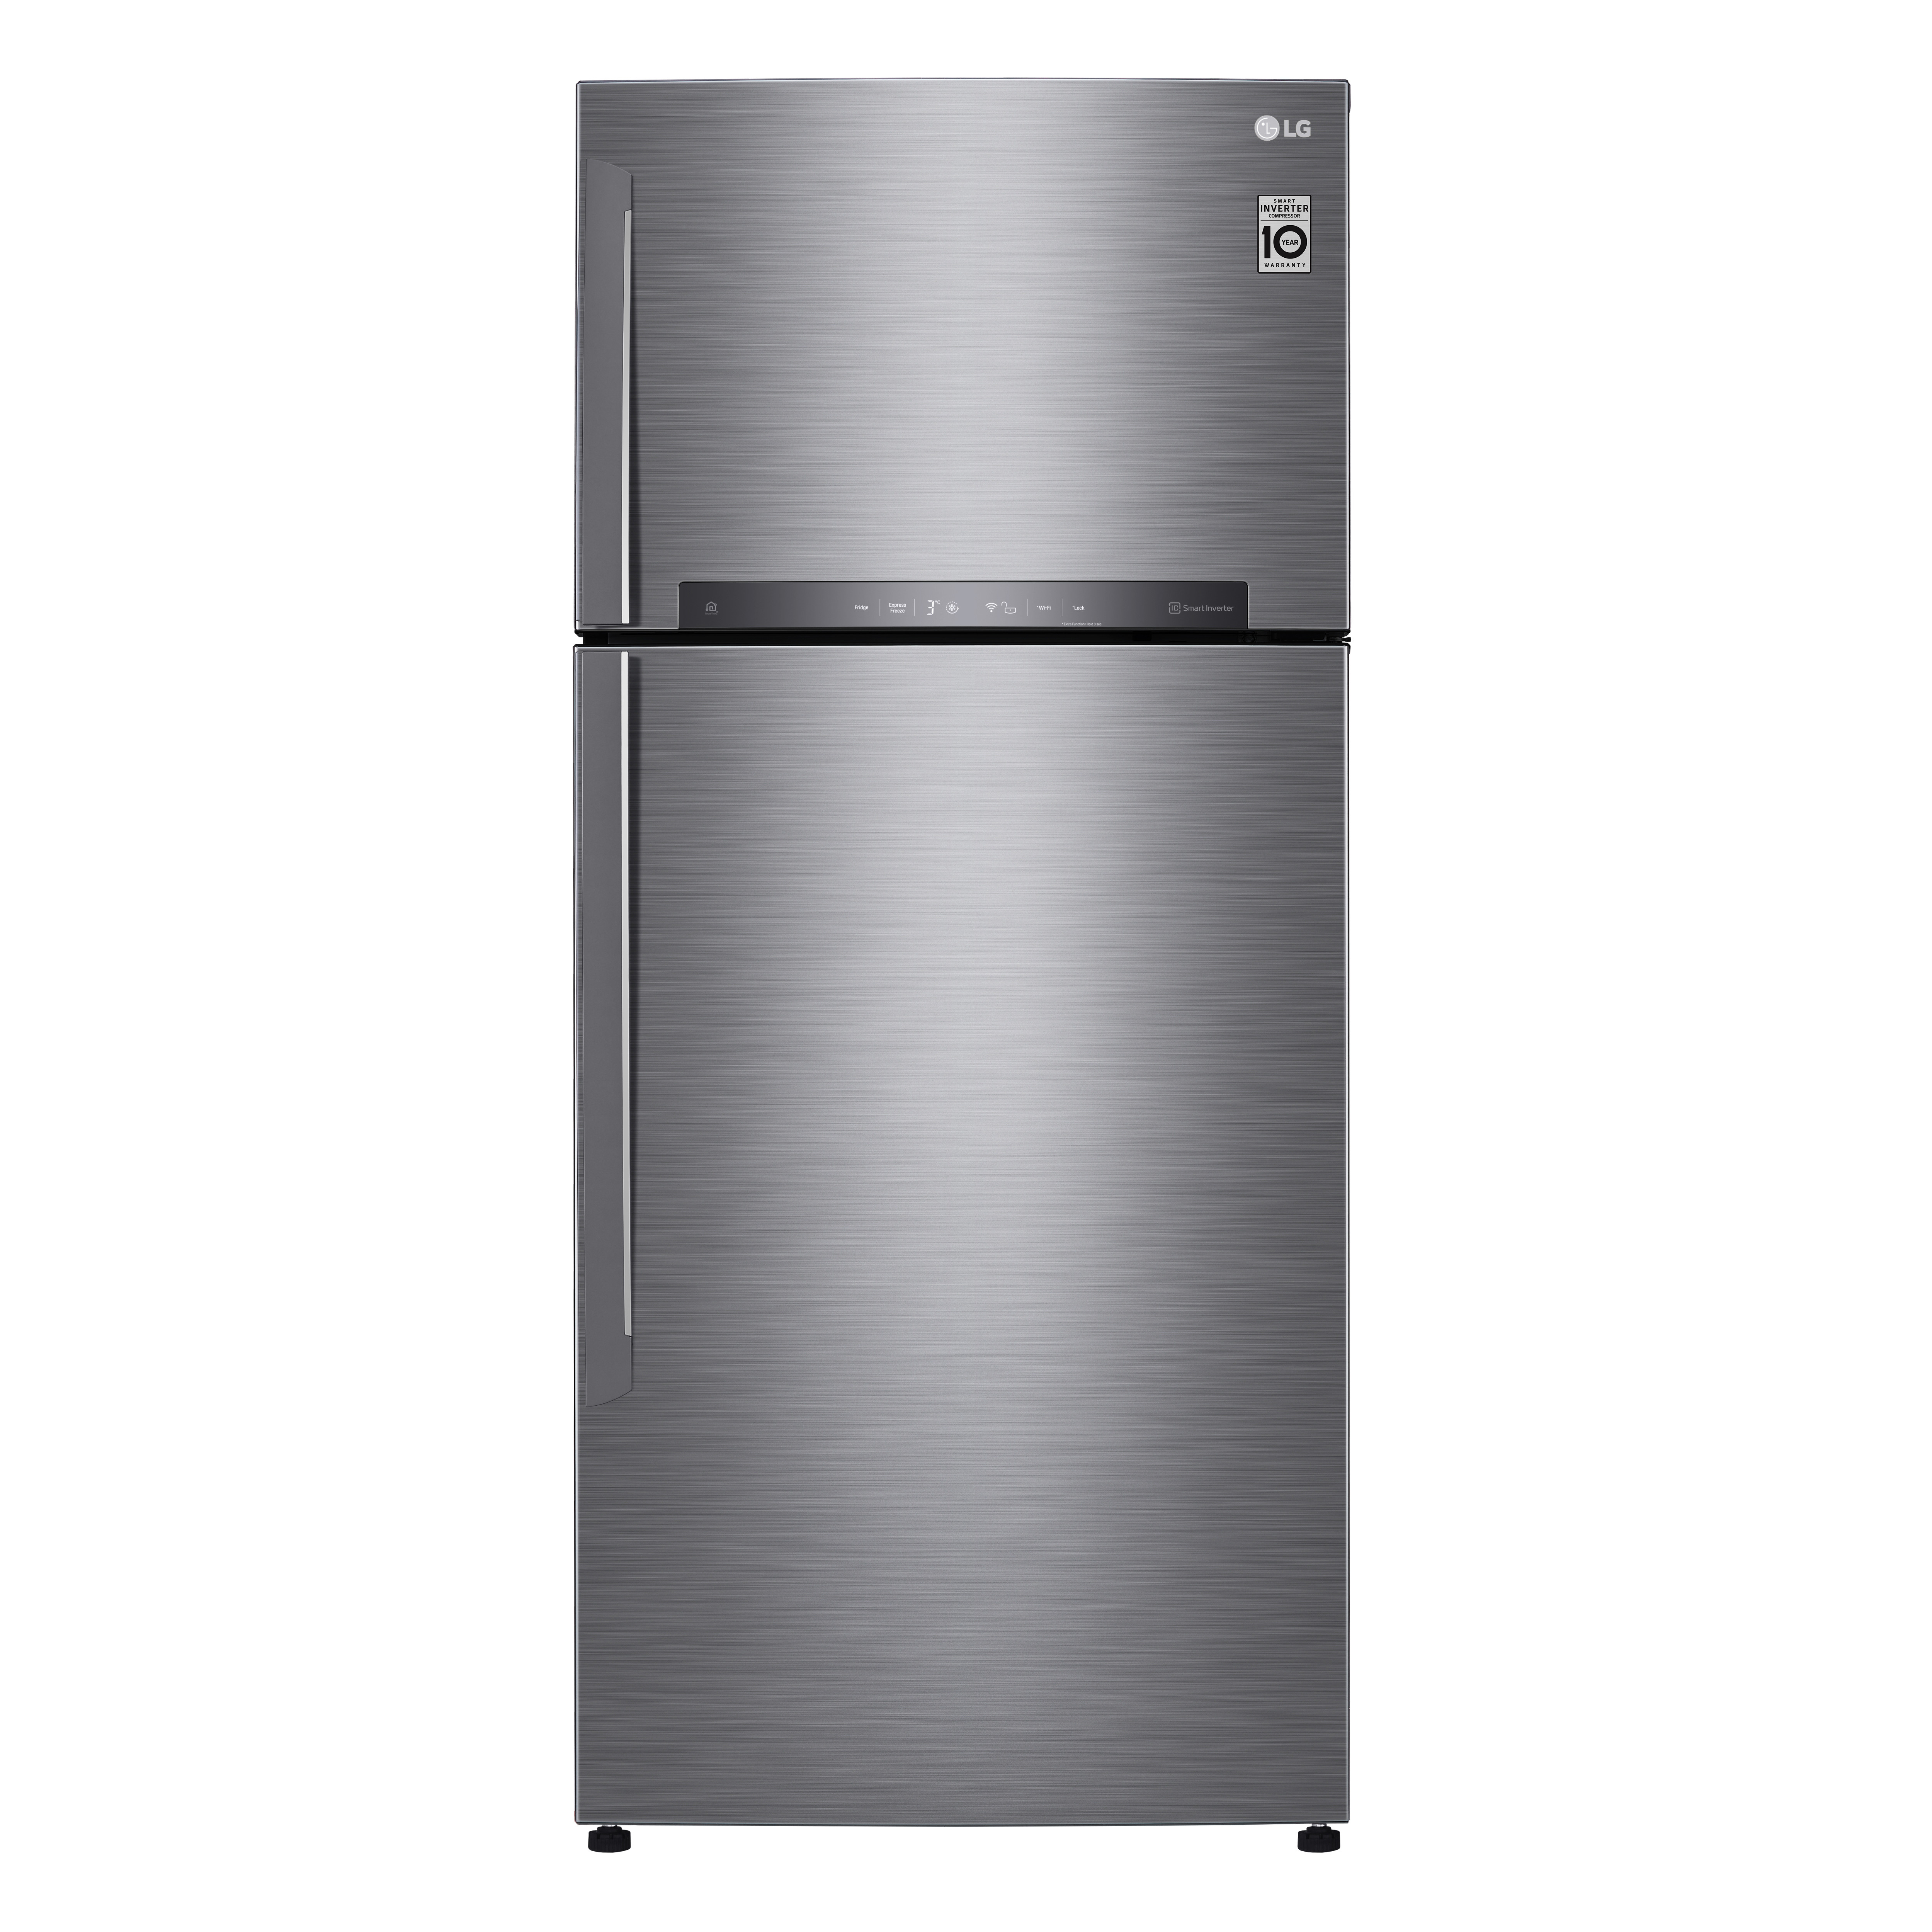 LG Top Freezer Refrigerator with Inverter Motor, No Frost, 506 Liters, Silver - GN-H722HLHL